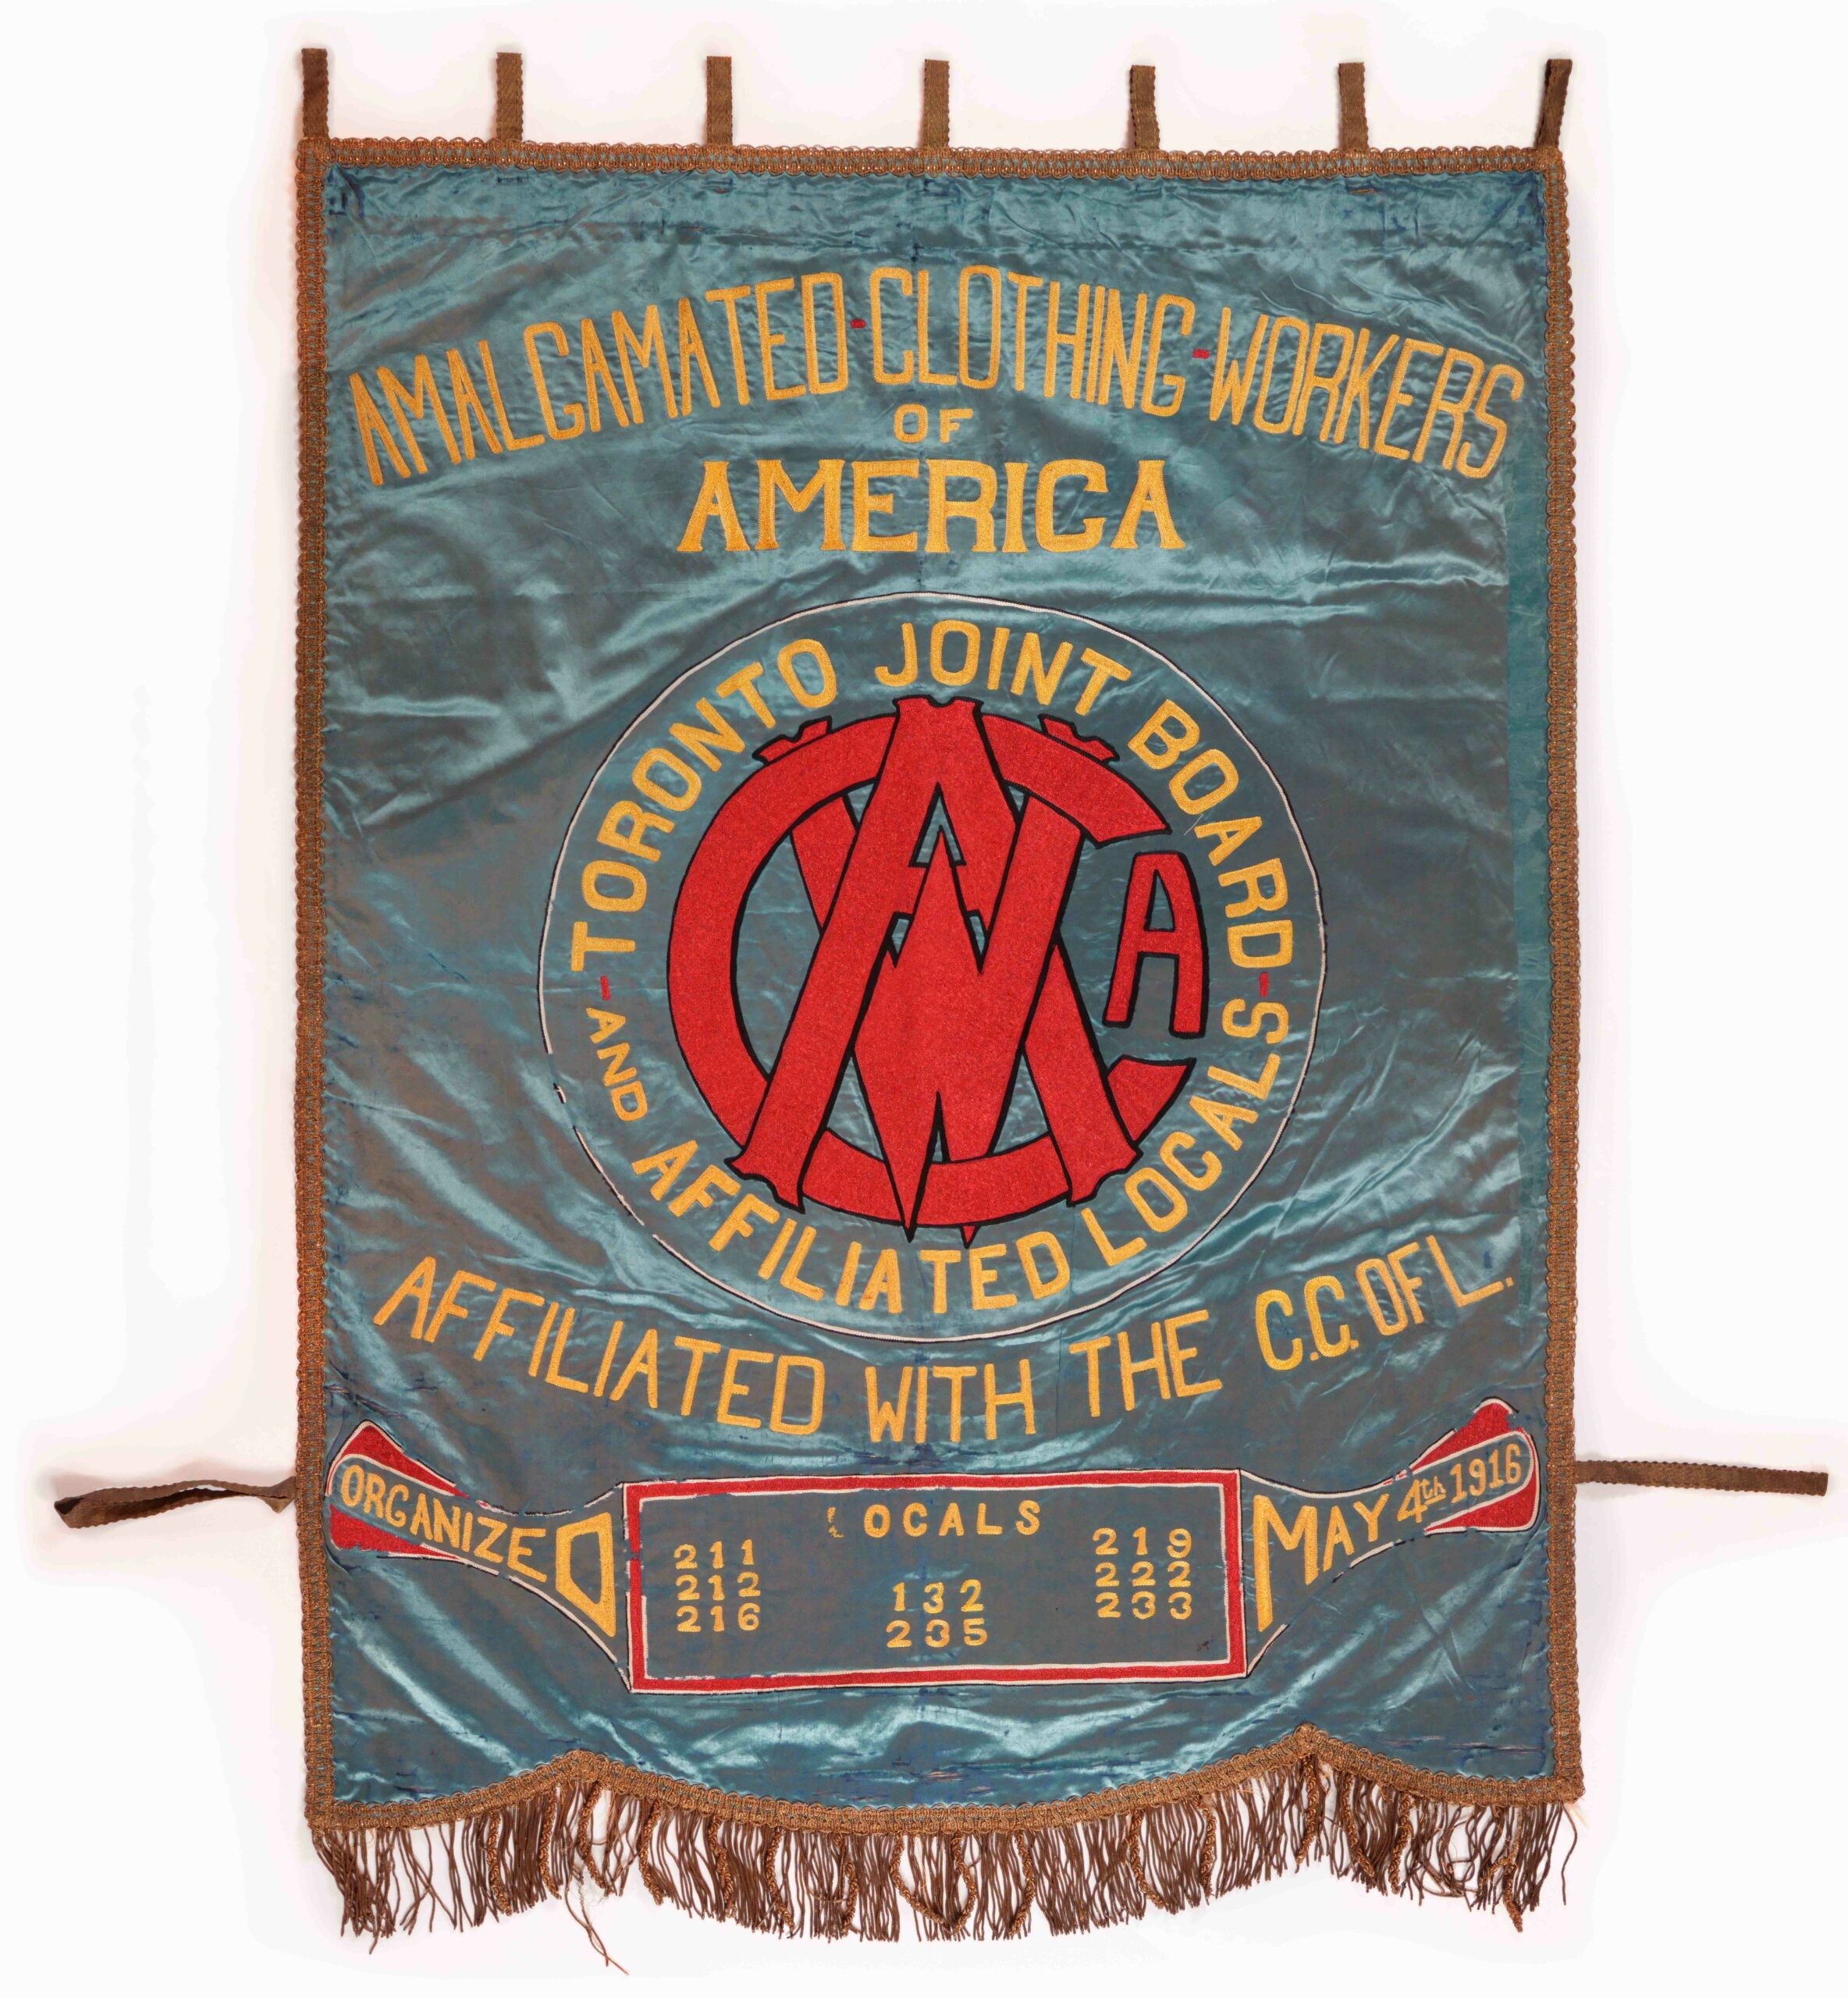 Banner, Amalgamated Clothing Workers of America, Toronto Joint Board and Affiliated Locals 132, 211, 212, 216, 219, 222, 233, 235